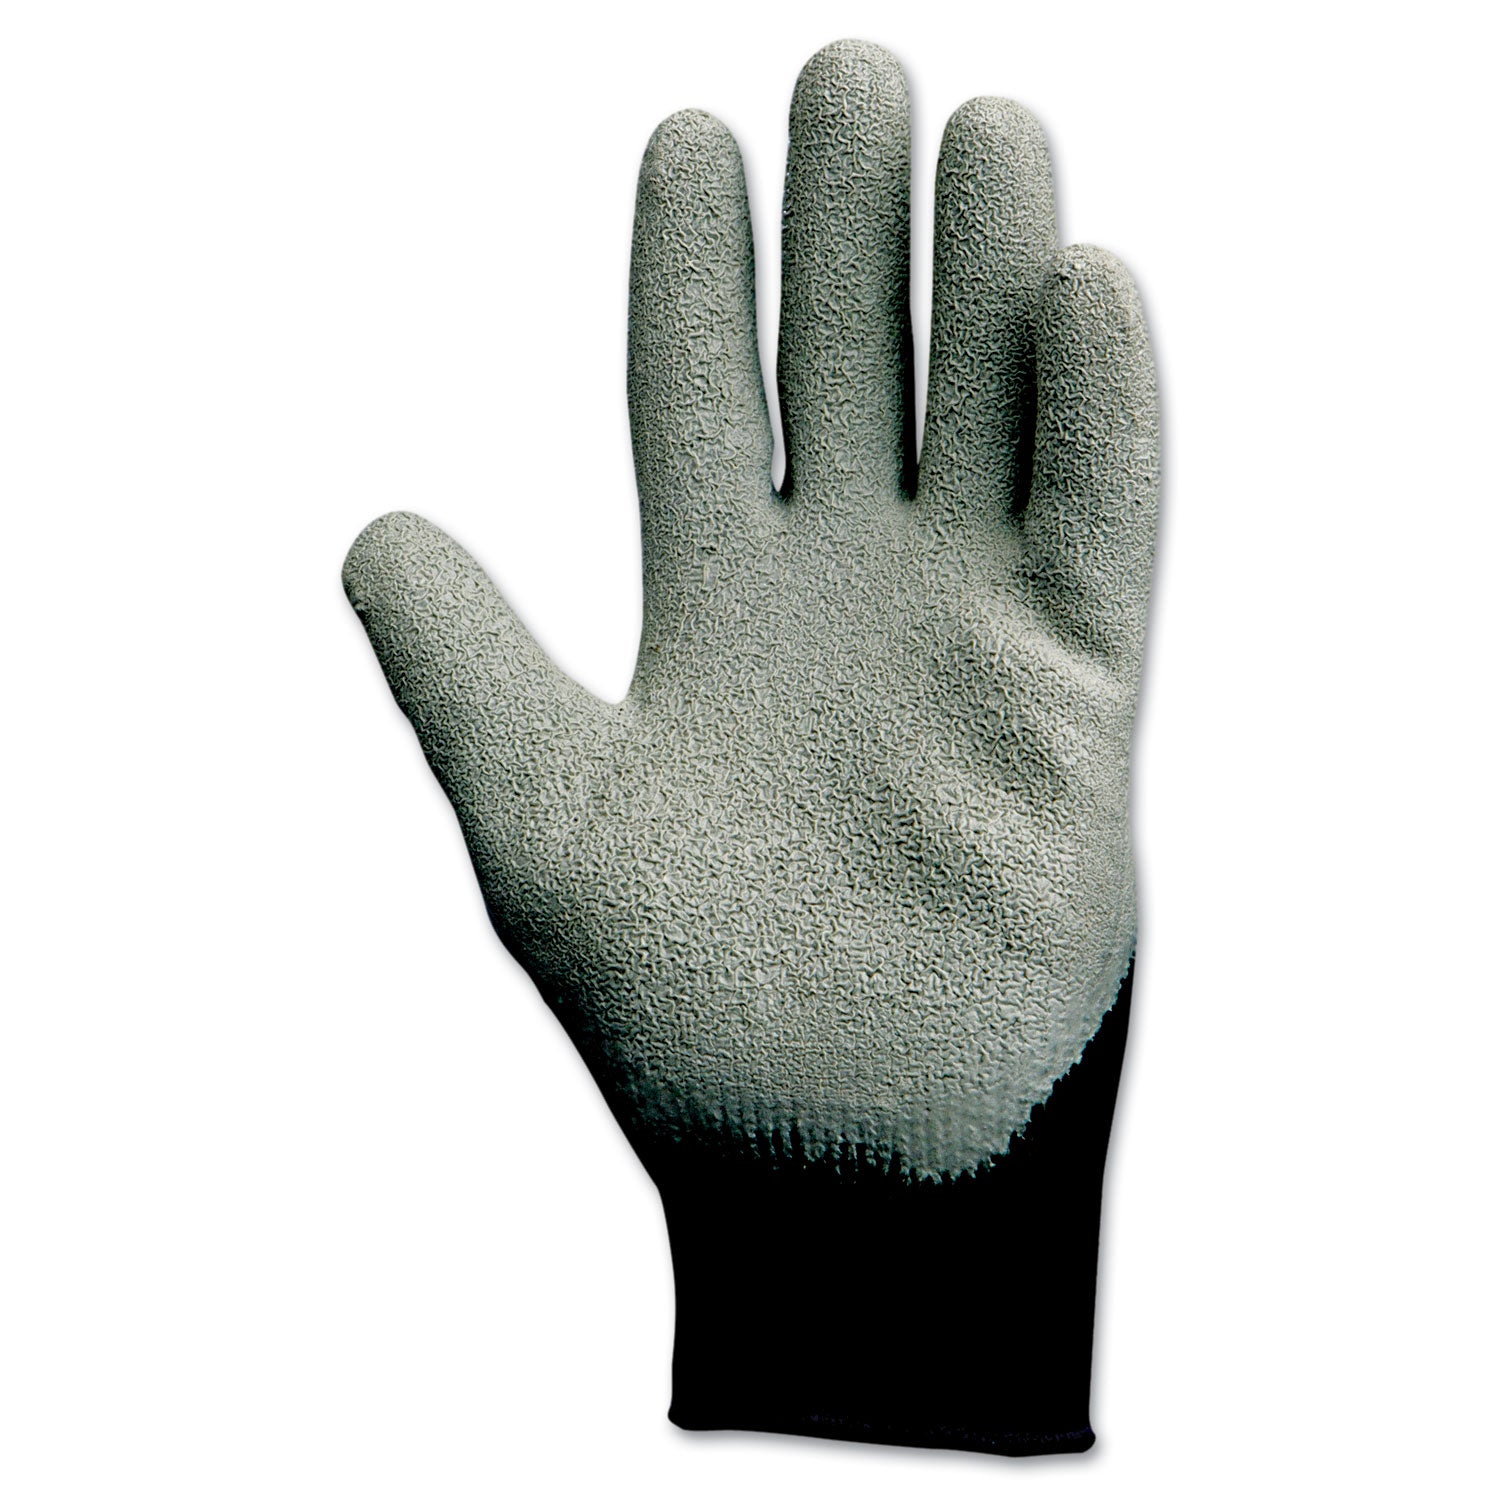 g40-latex-coated-poly-cotton-gloves-250-mm-length-large-size-9-gray-12-pairs_kcc97272 - 1